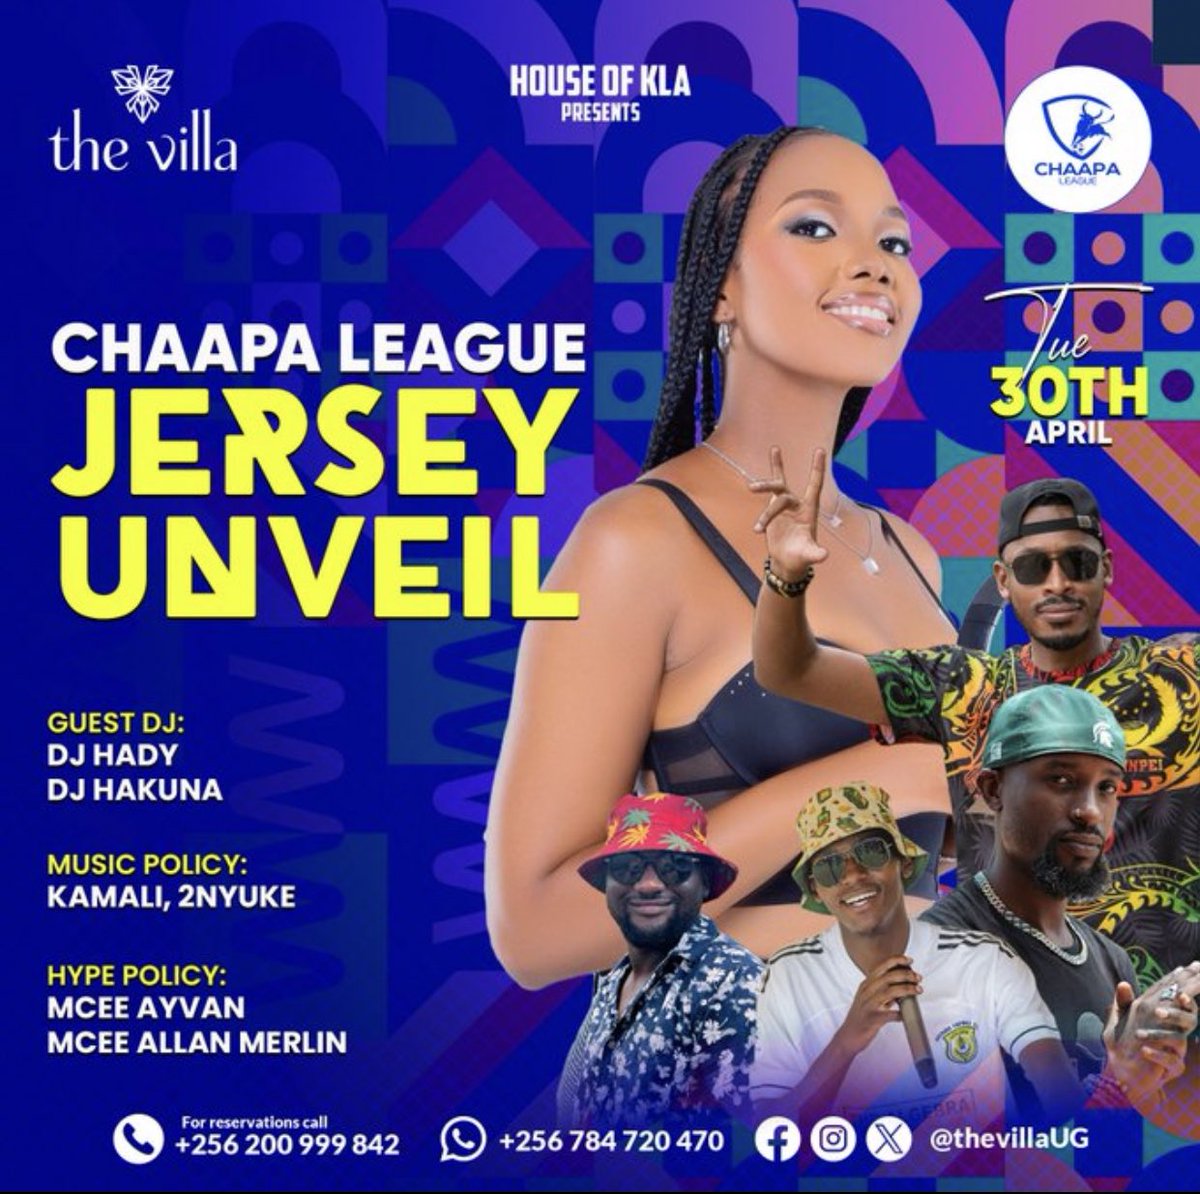 Good morning 😃☀️🌞 Today na today we shall unveil our jersey at @thevillaUG so we request our dear supporters to come through in big numbers since our tables are already reserved 🤝🤝